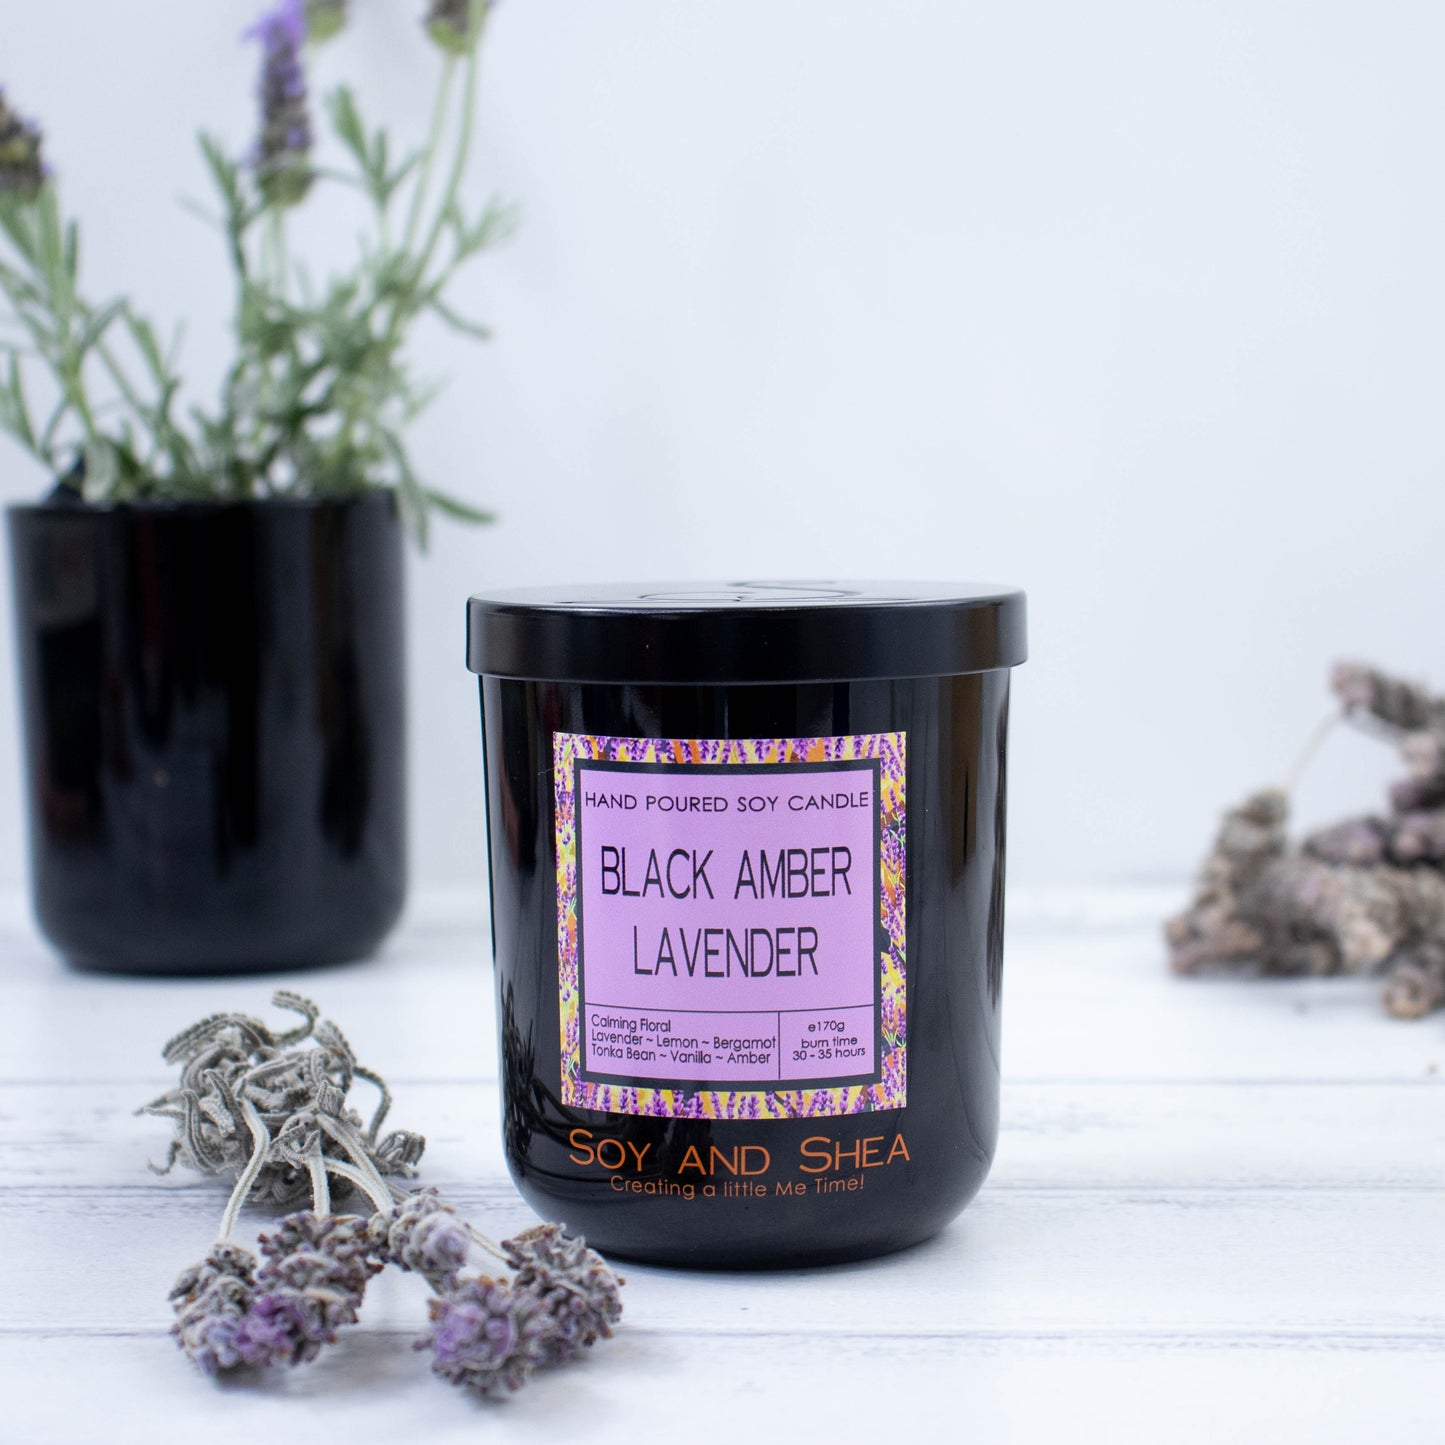 A black glass candle jar with fragrance label sits to the front of the picture.  There is a black metal lid with an etching of the logo on top.  Surrounding the candle is some dried lavender with a pot of fresh lavender growing in the background